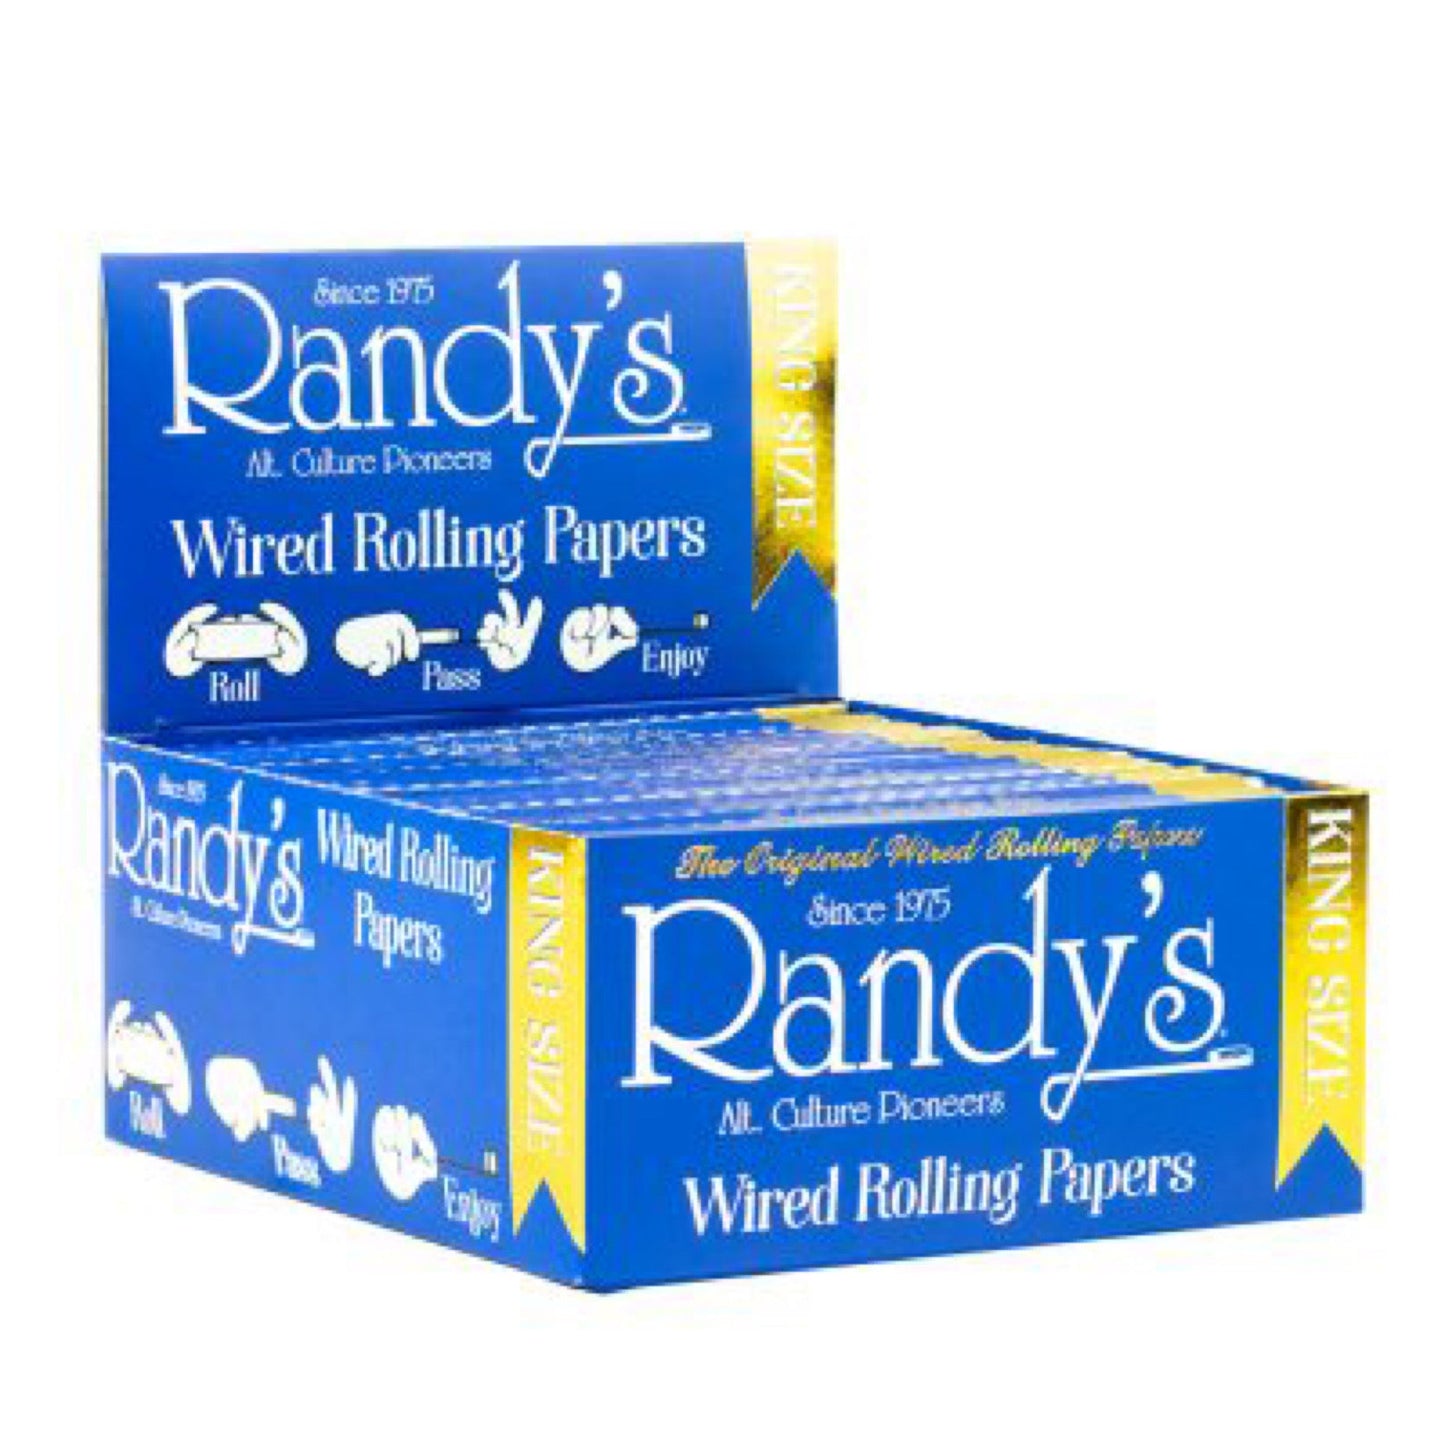 Randy’s Classic King Size Wired Rolling Papers by Randy’s | Mission Dispensary